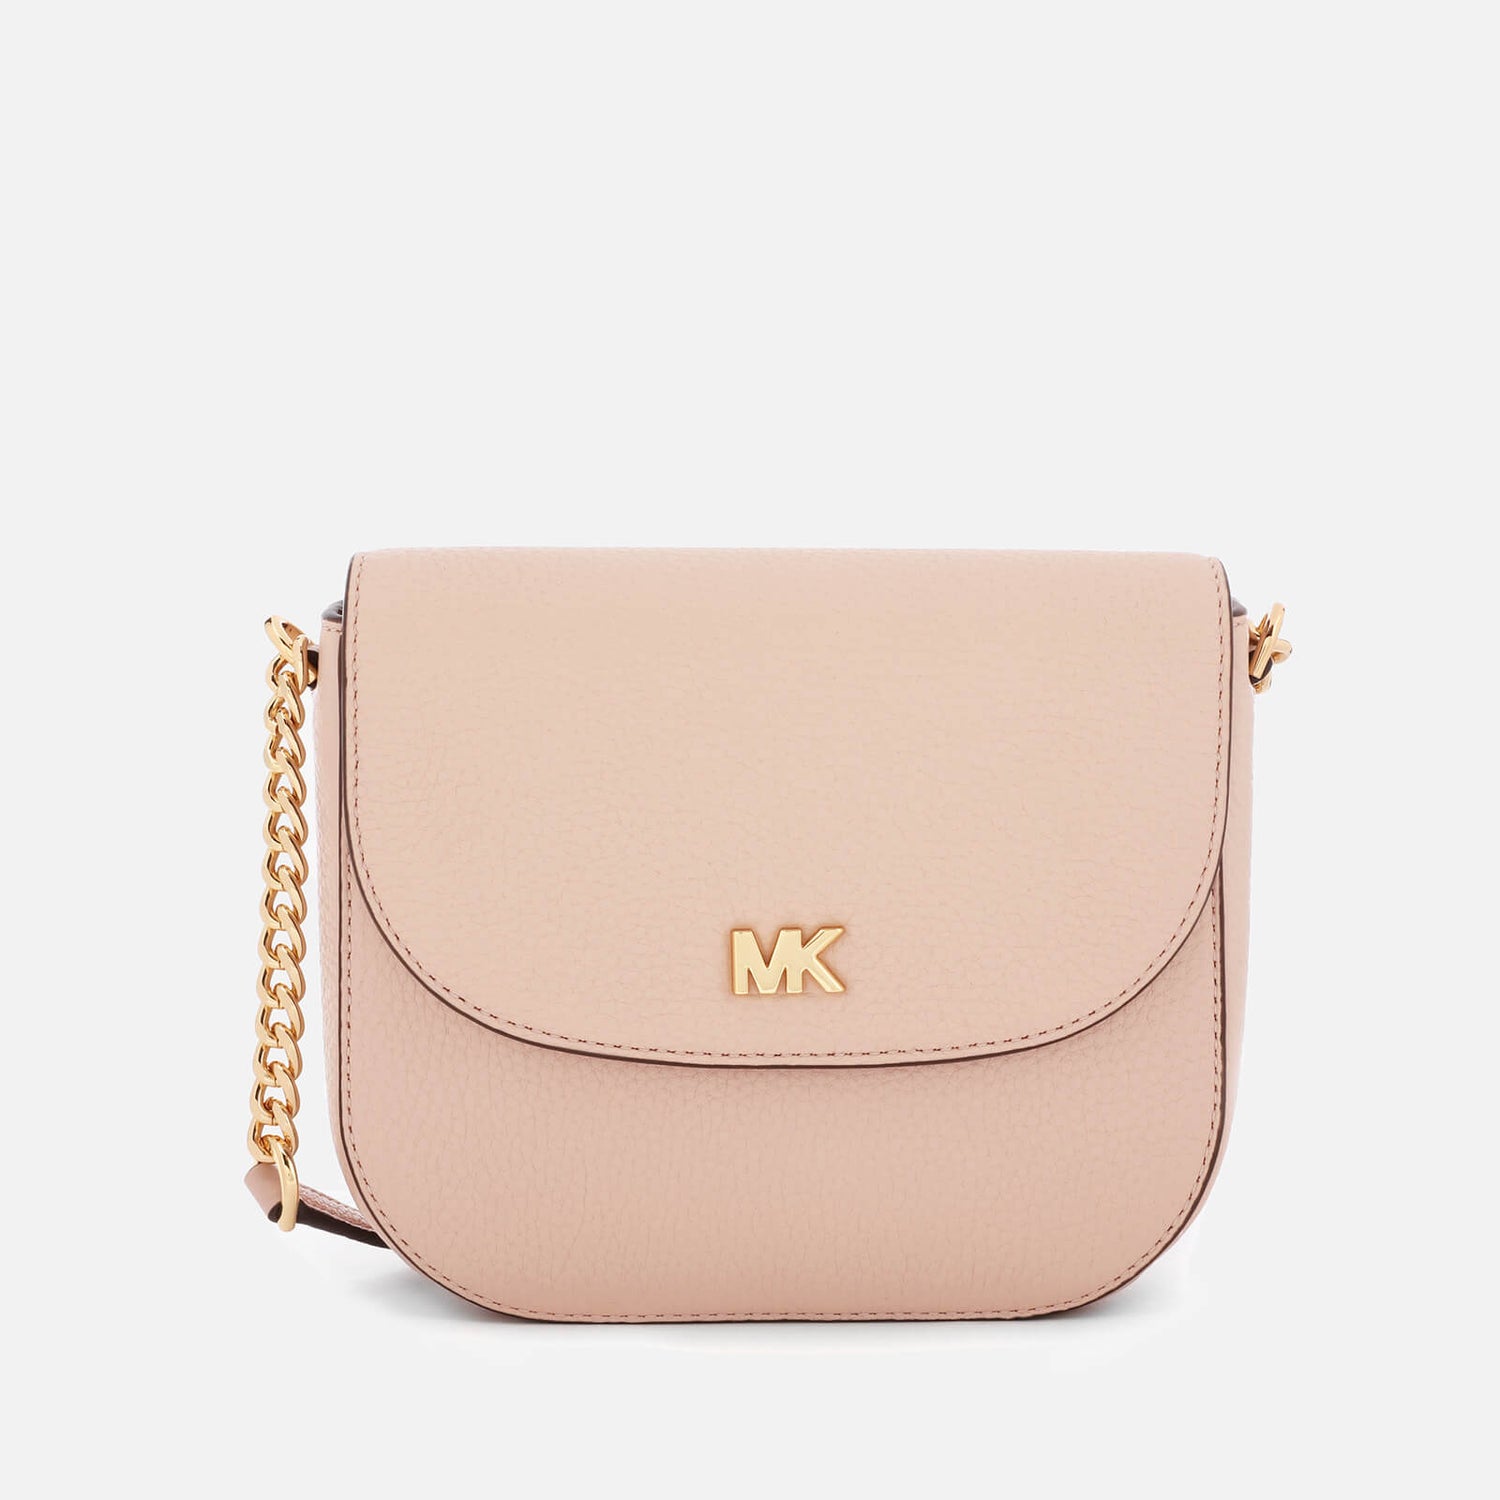 Buy Michael Kors Soft Pink Leather Satchel Bag at Amazon.in